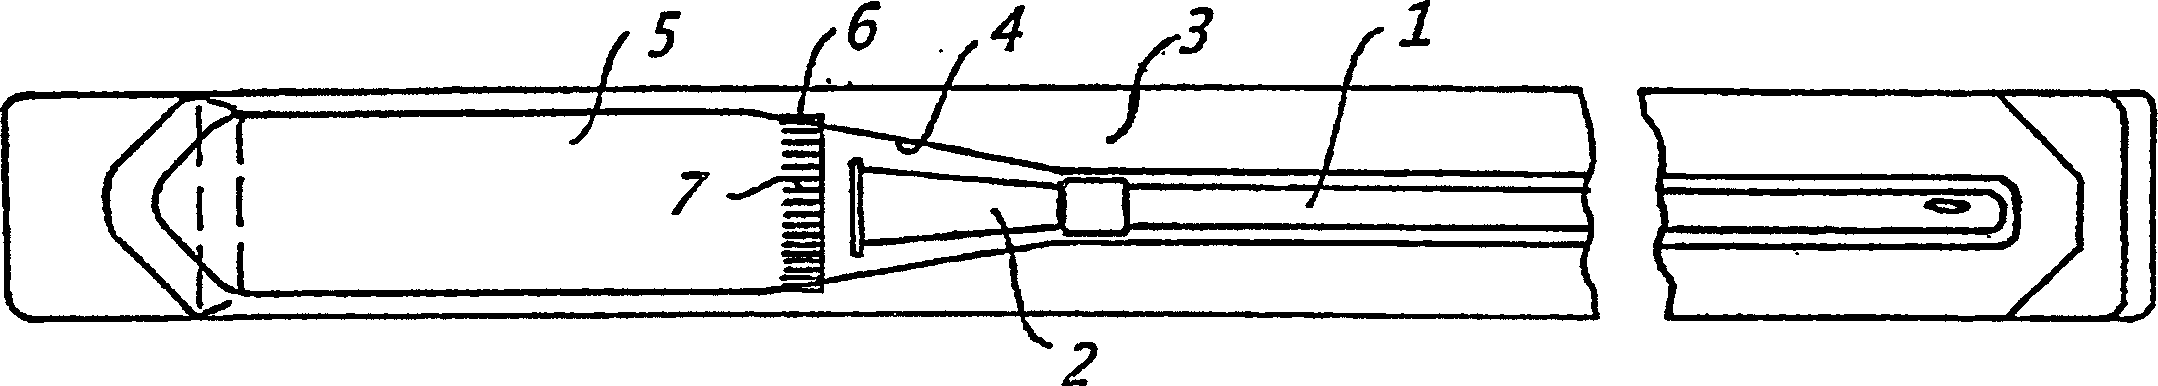 An assembly for the preparation of a medical device having a coating comprising hydrogen peroxide